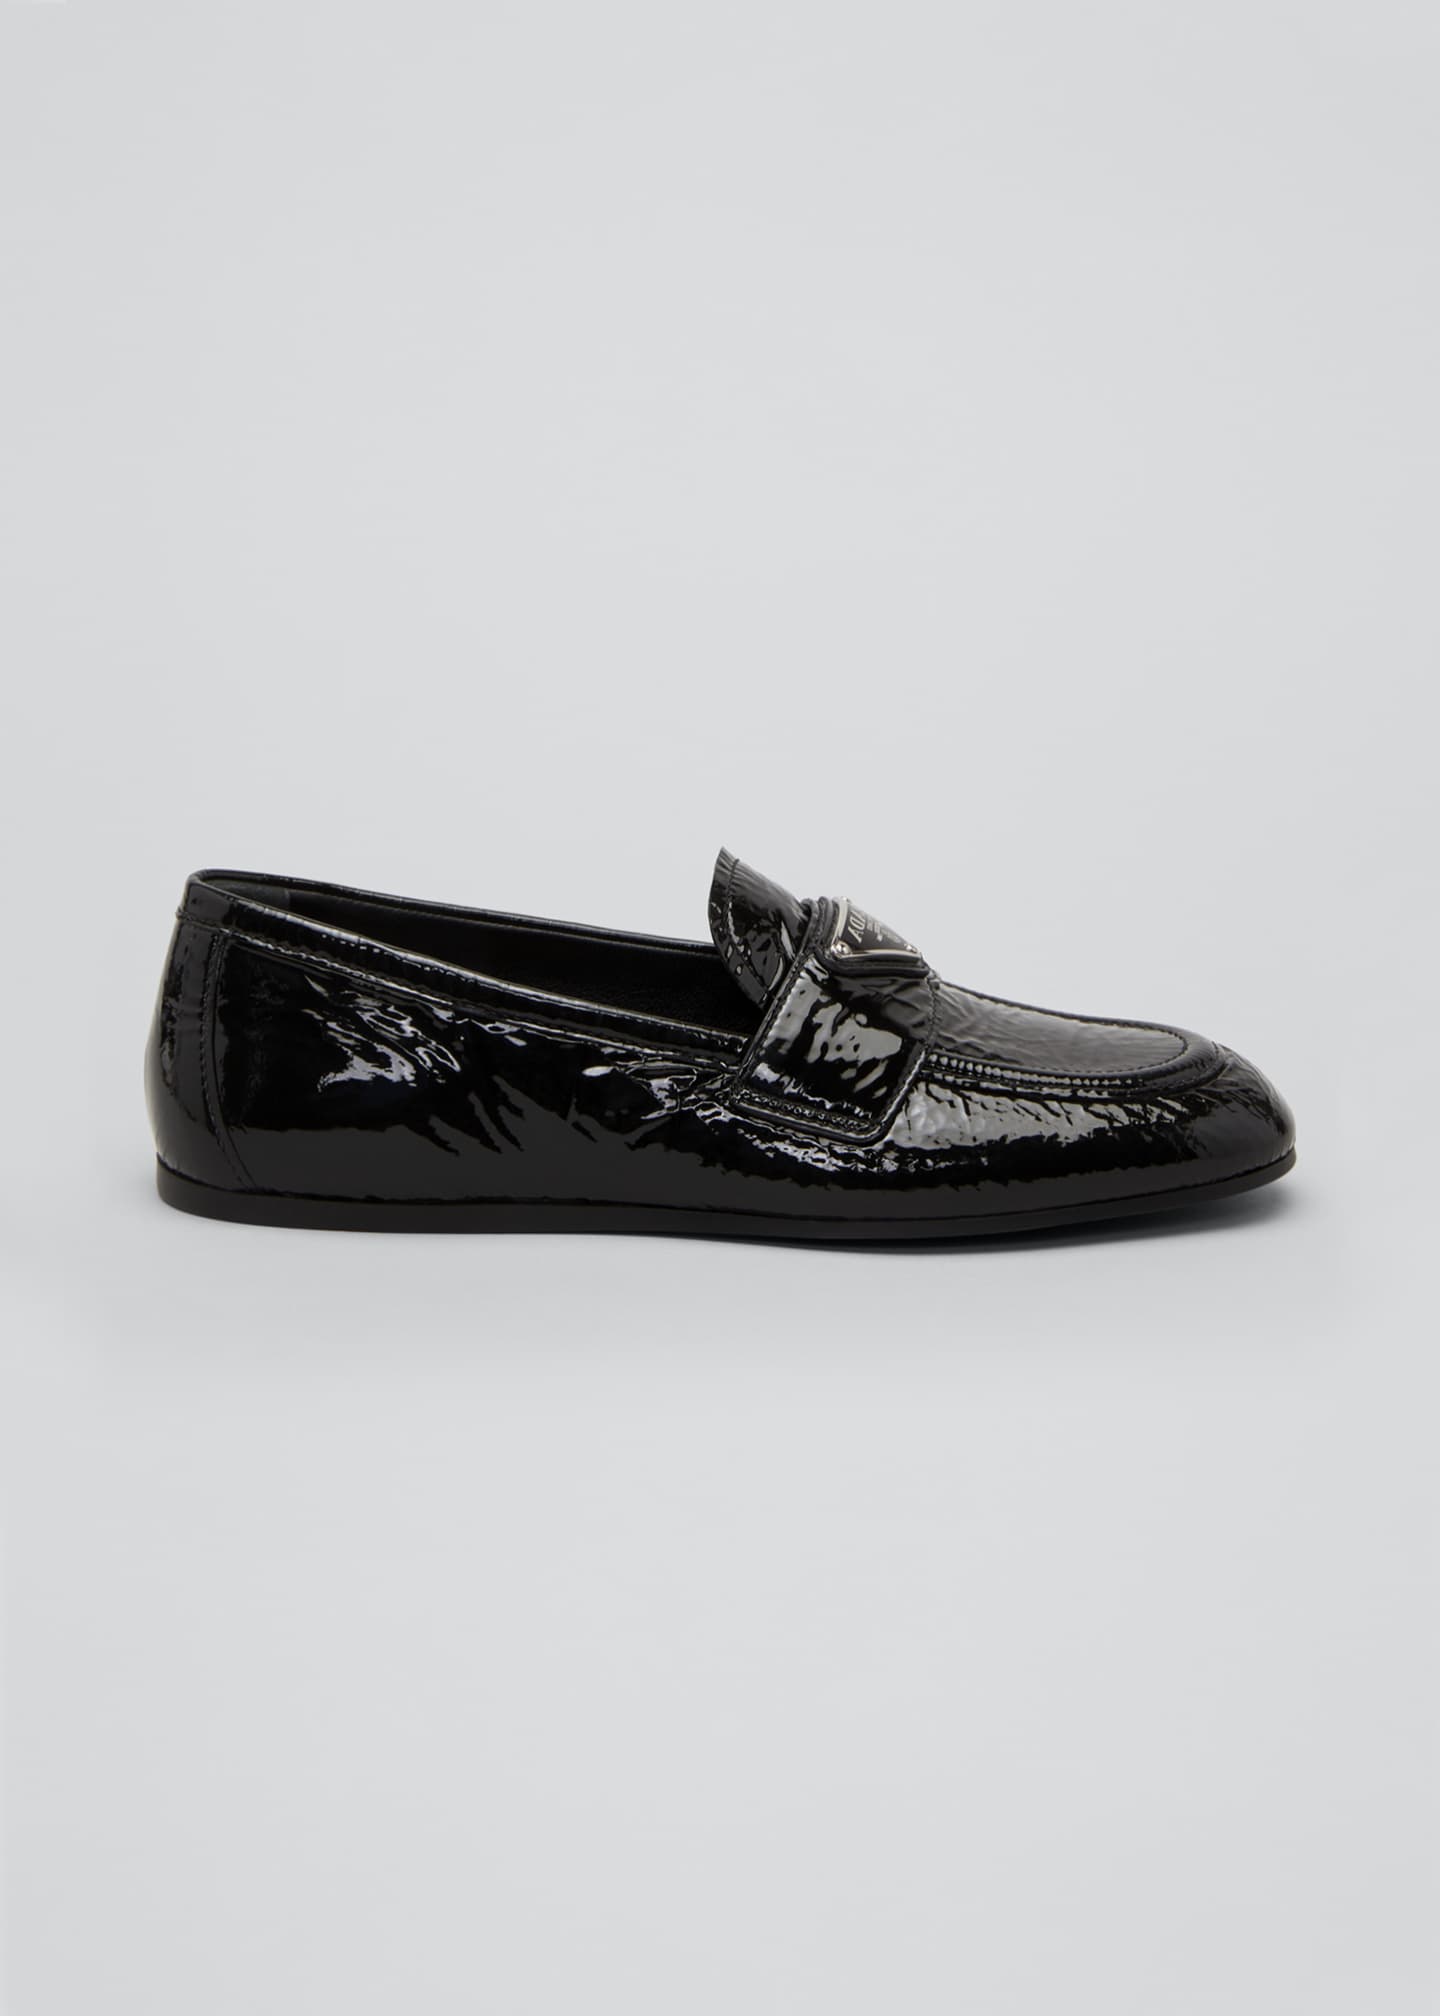 Prada 5mm Crinkle Patent Leather Loafers with Triangle Logo - Bergdorf ...